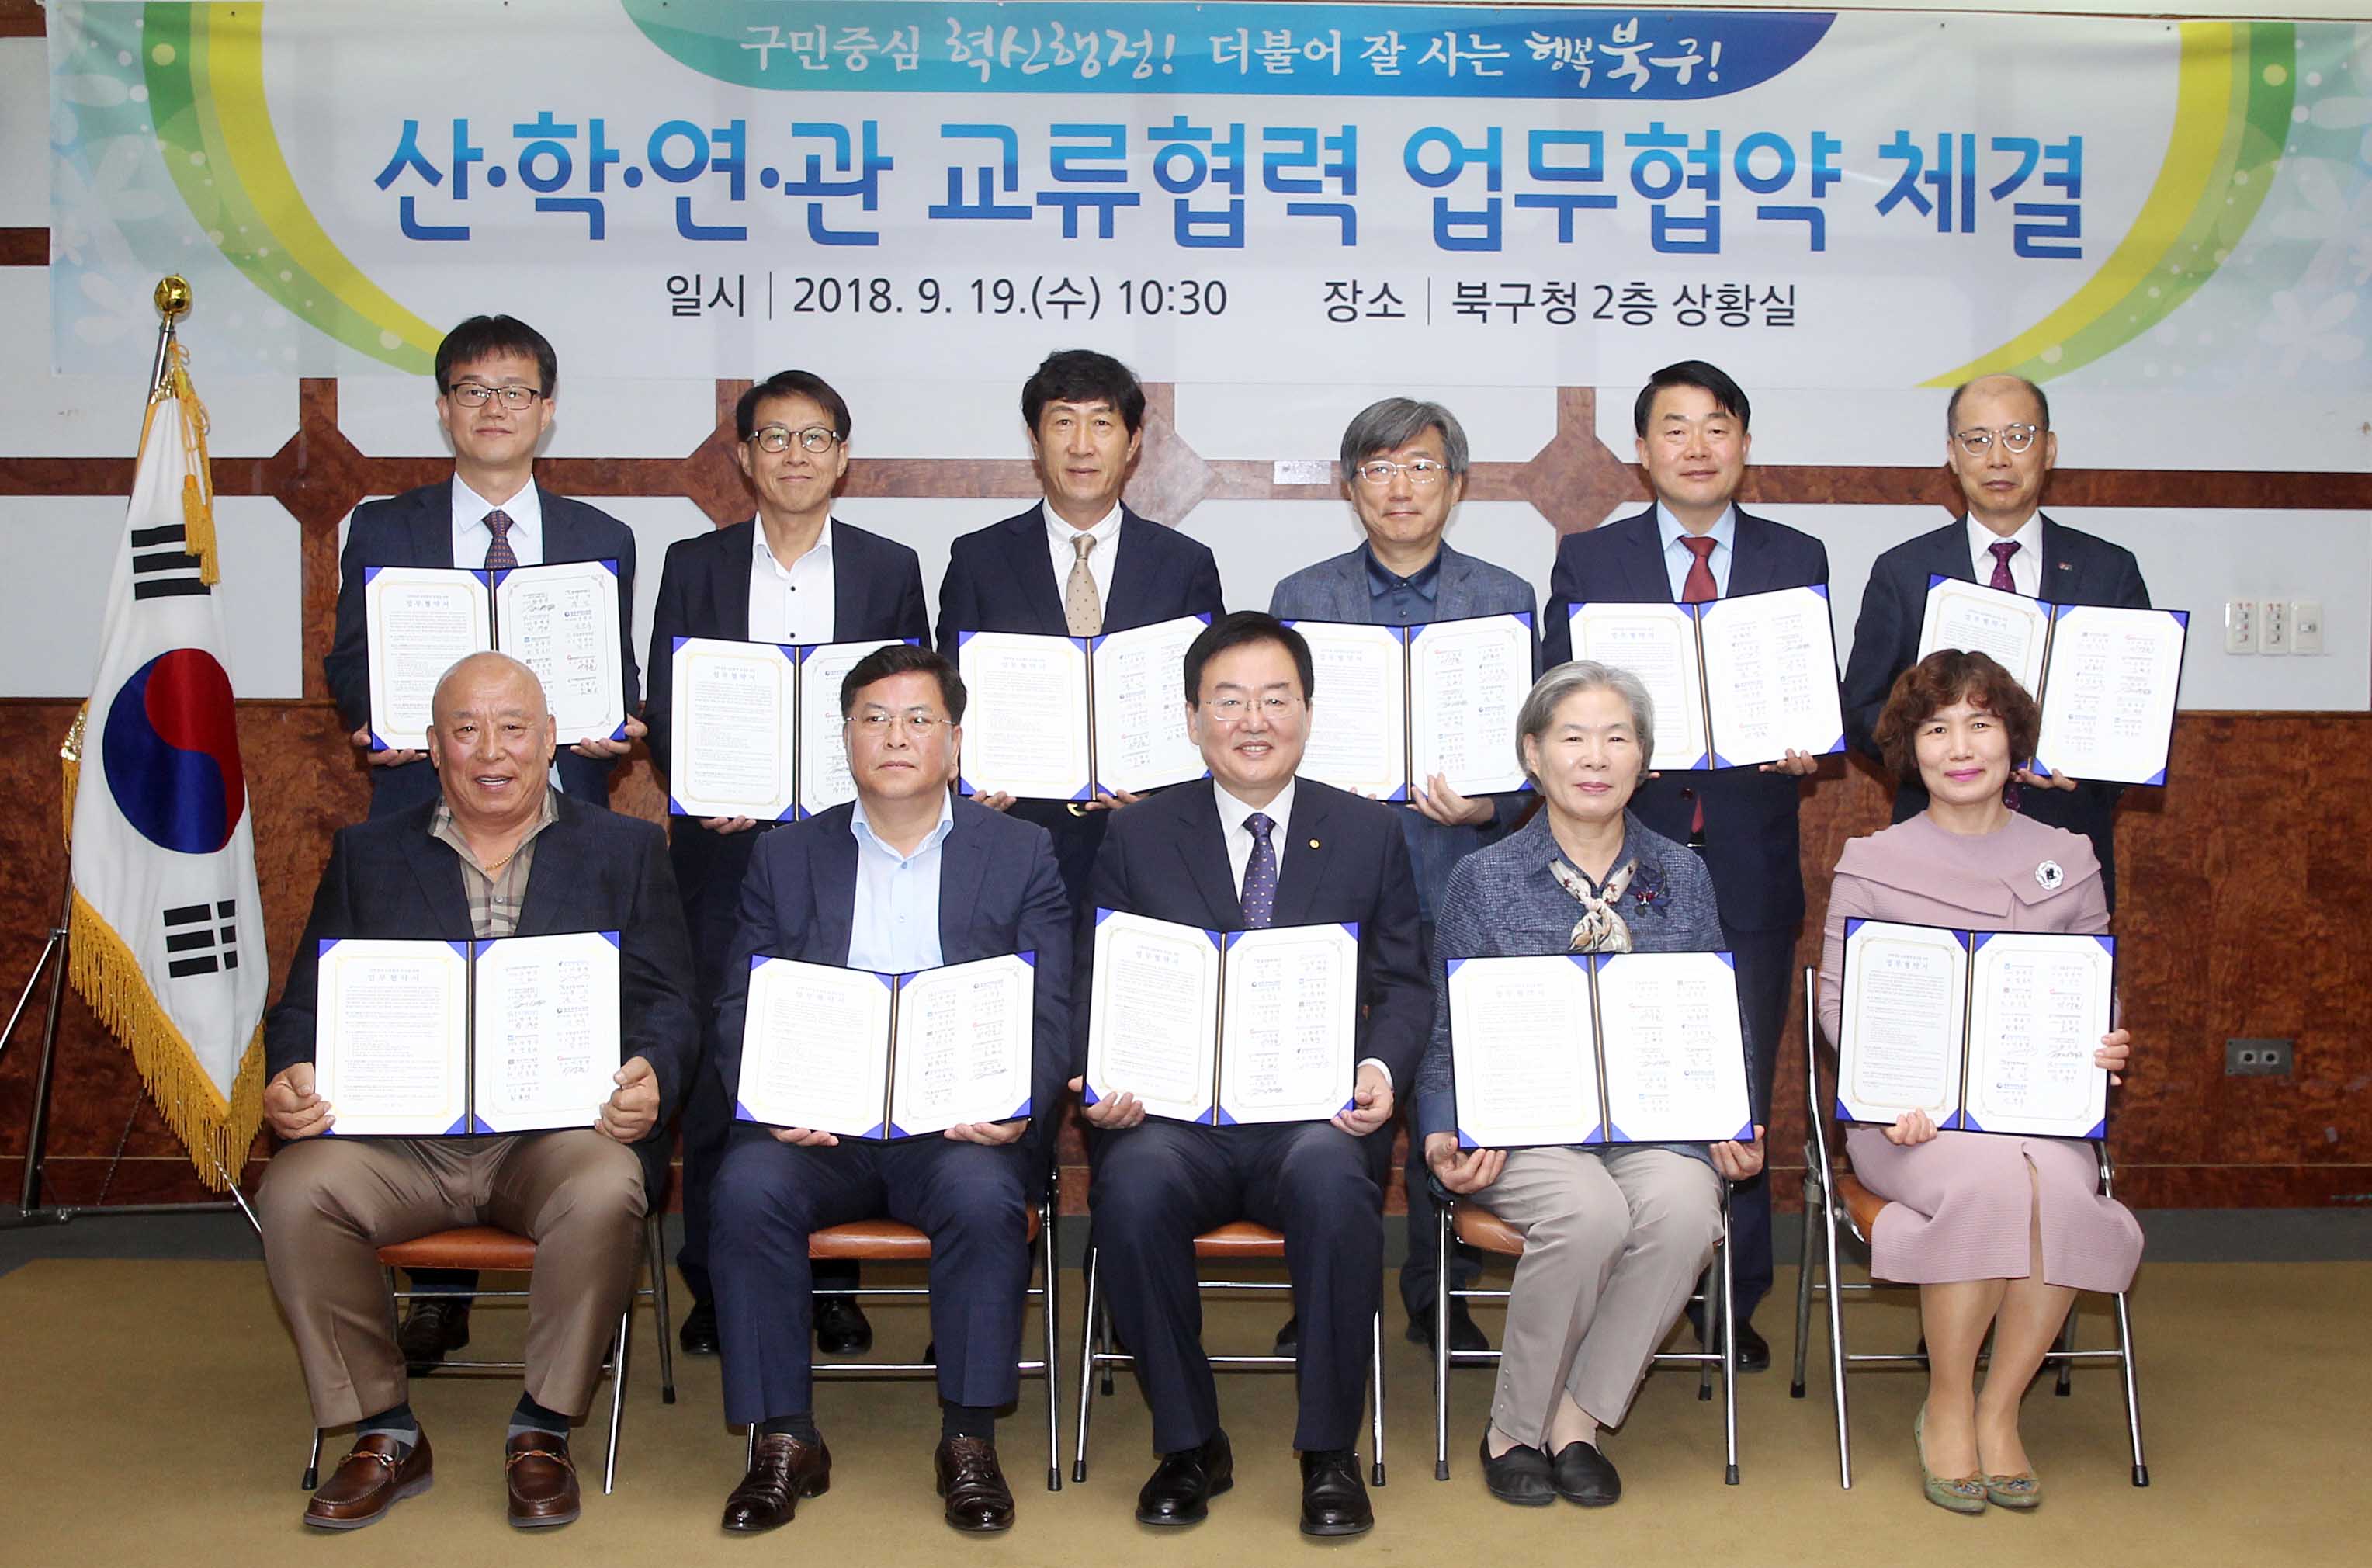 GIST signs an industry-academic exchange agreement to spread scientific culture and revitalize local economy 이미지